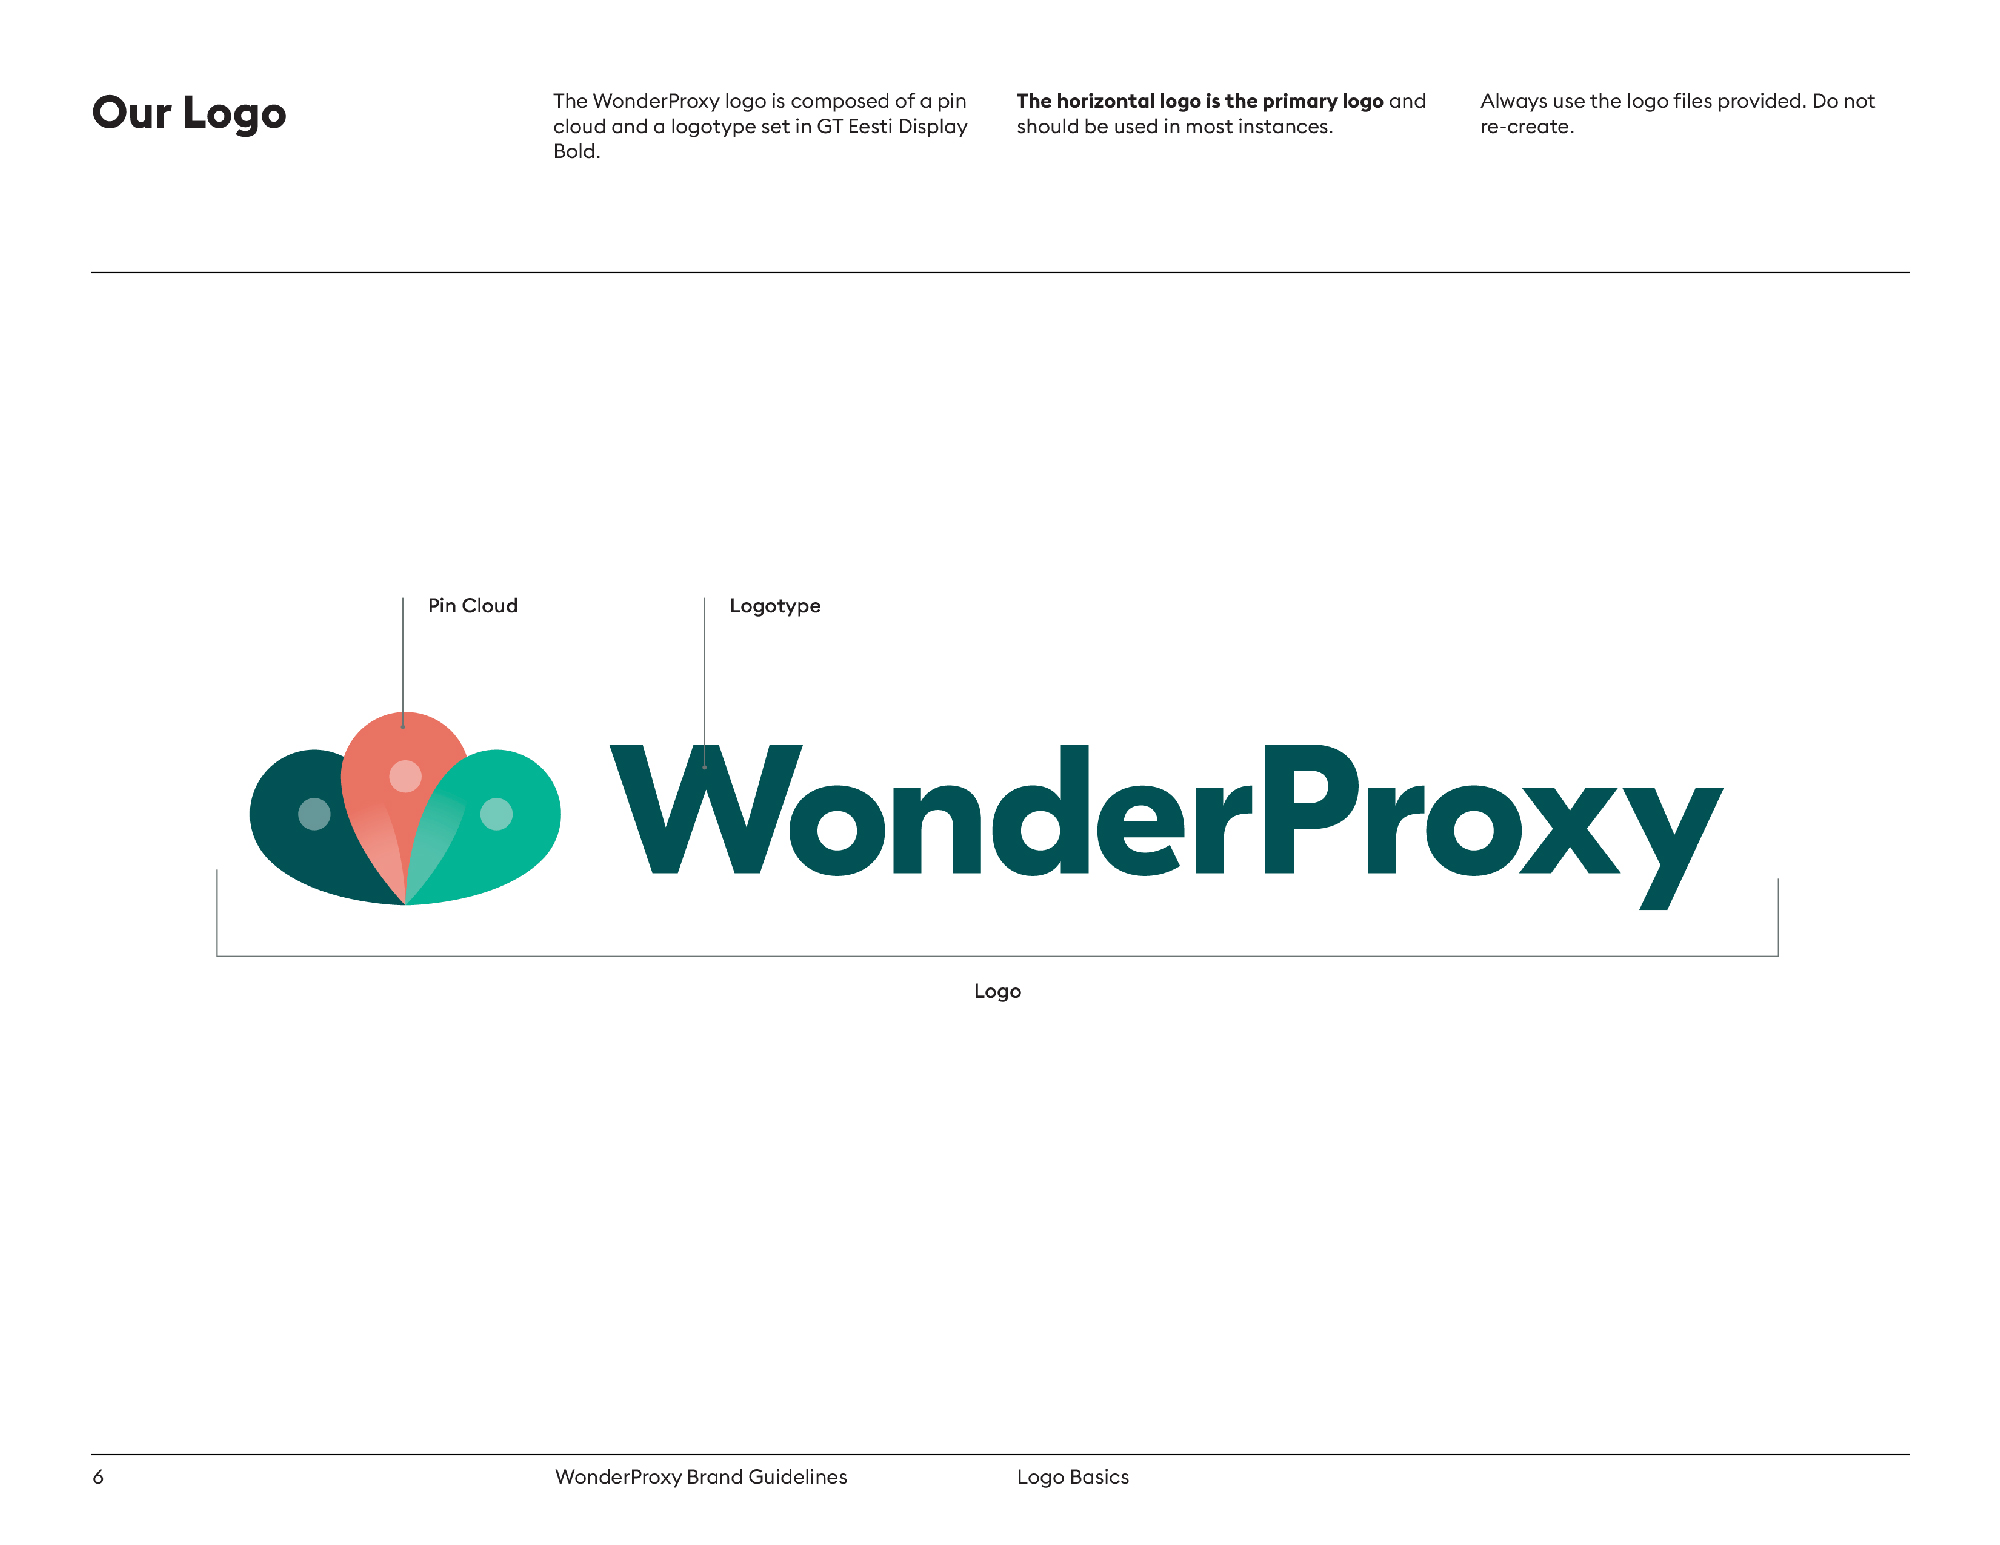 The Wonderproxy logo icon or “pin cloud” as we called it.